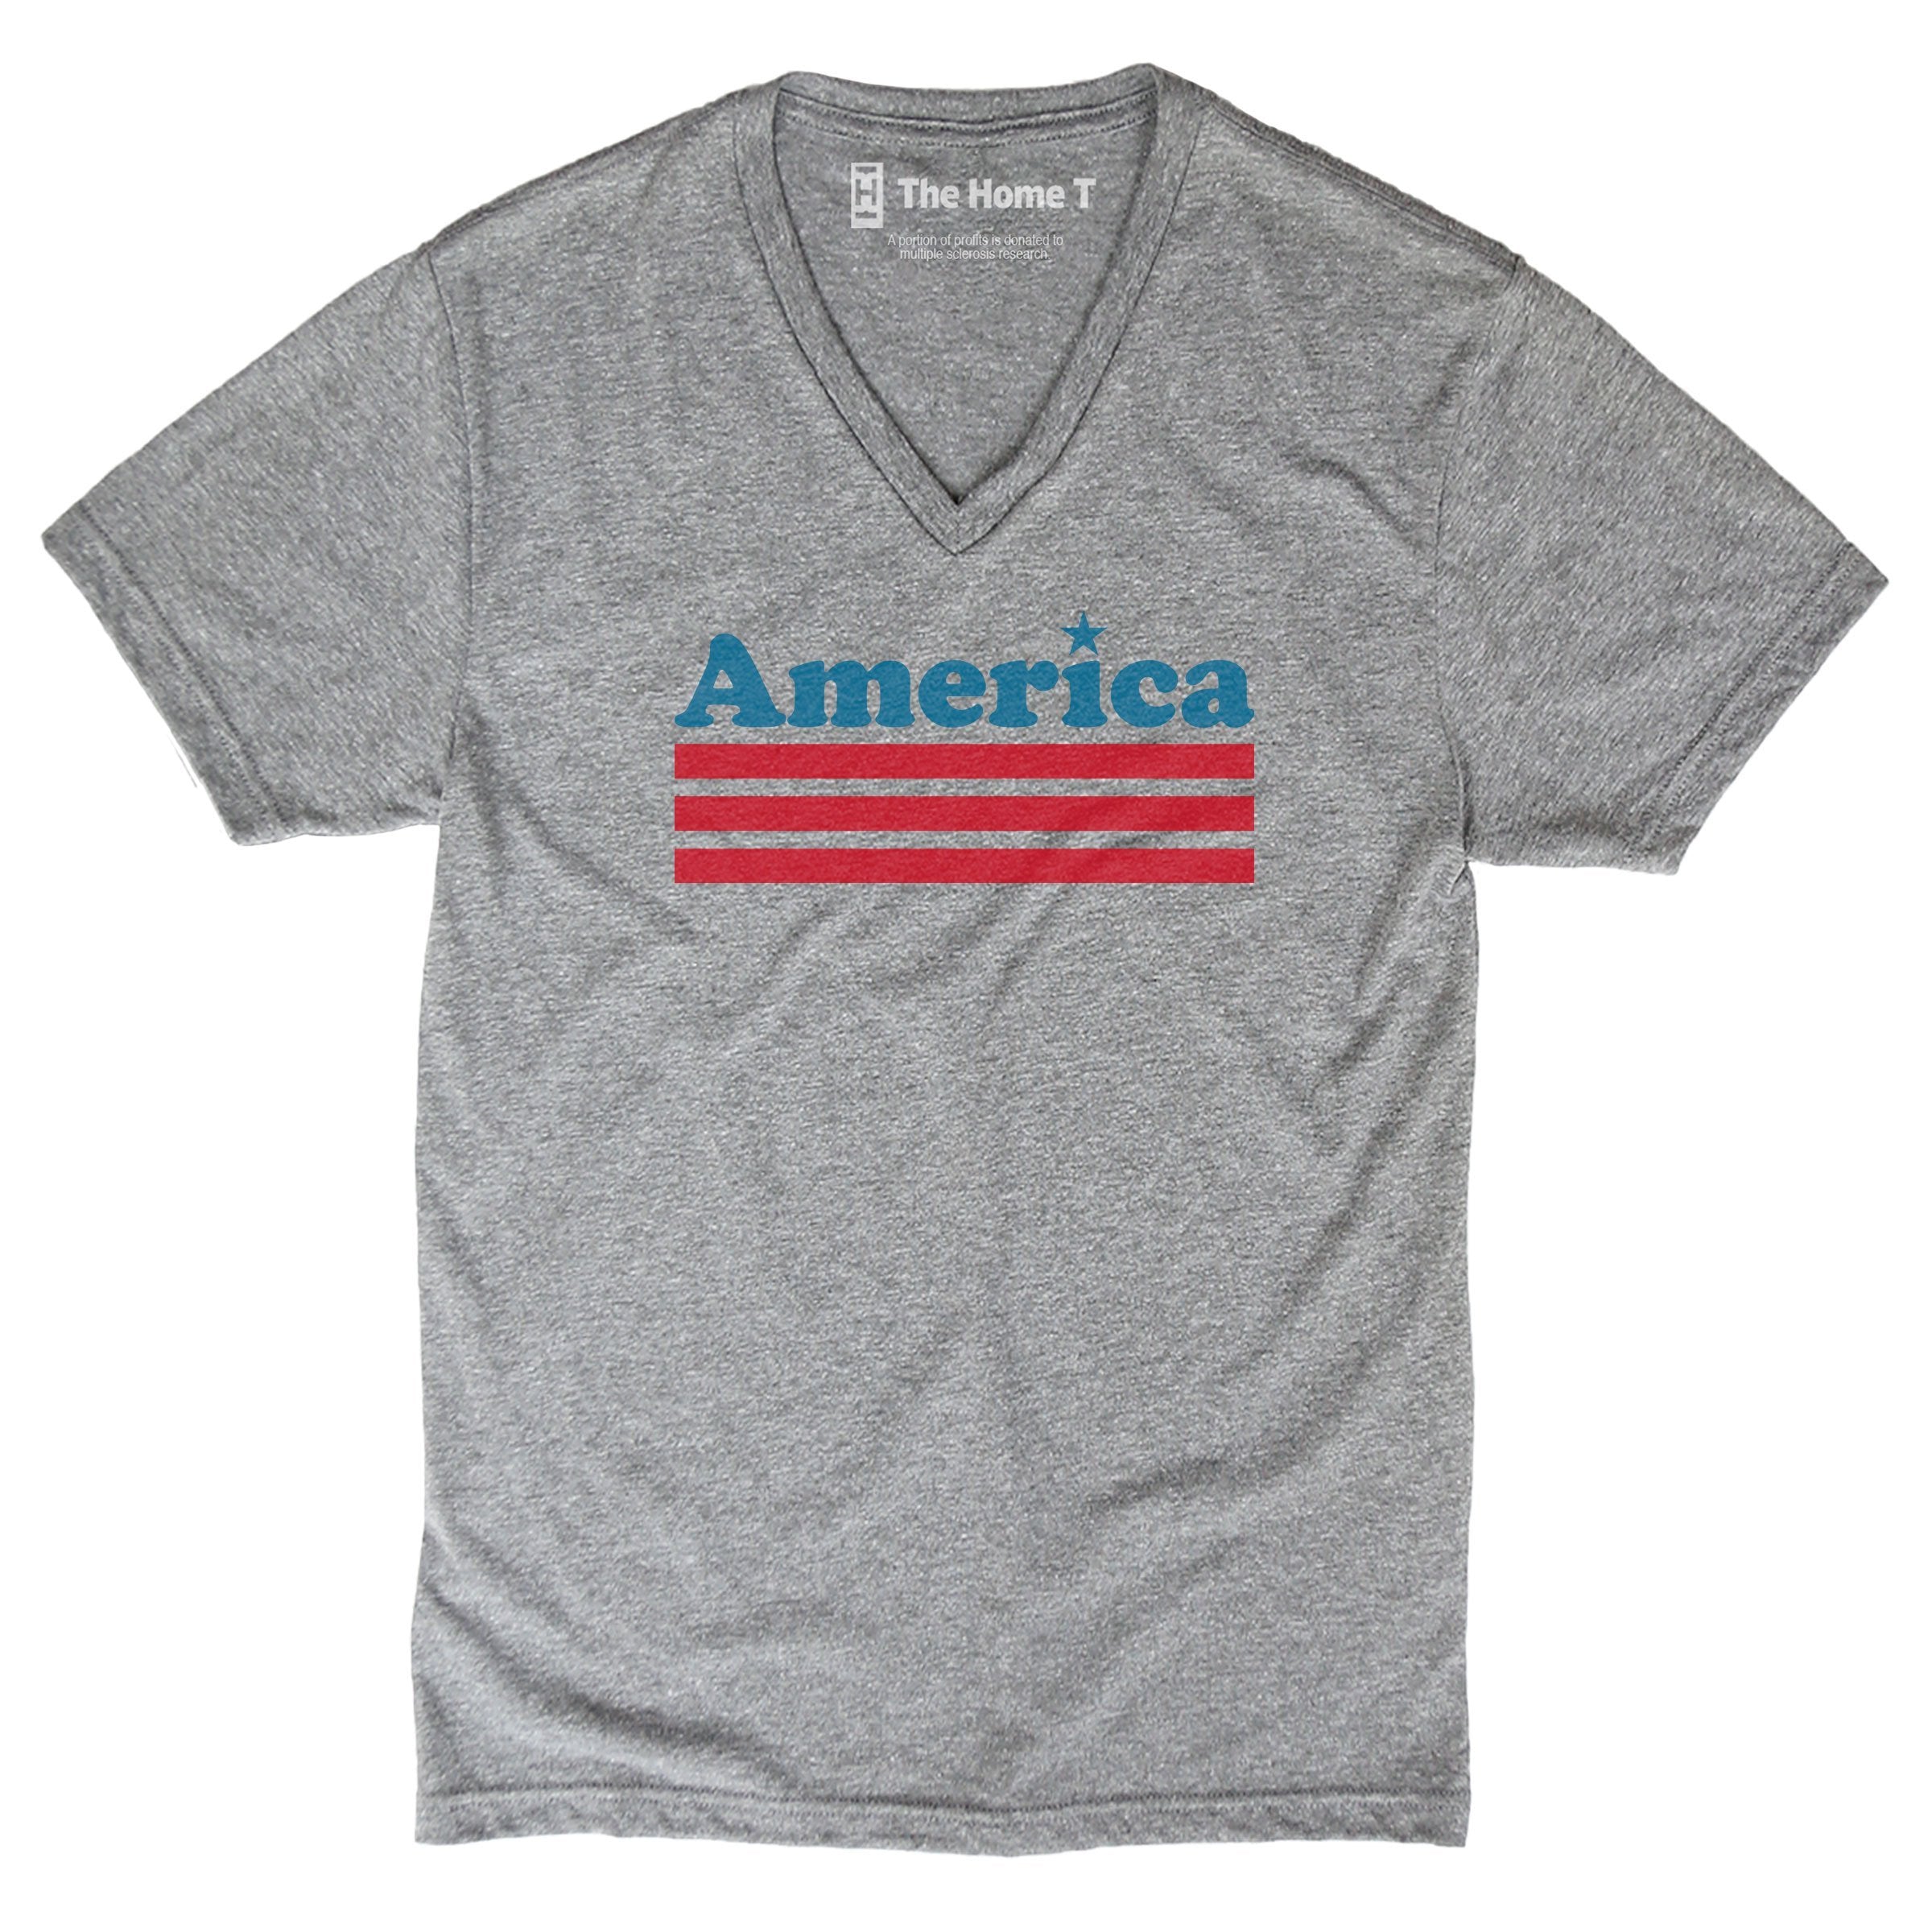 America Stipes The Home T